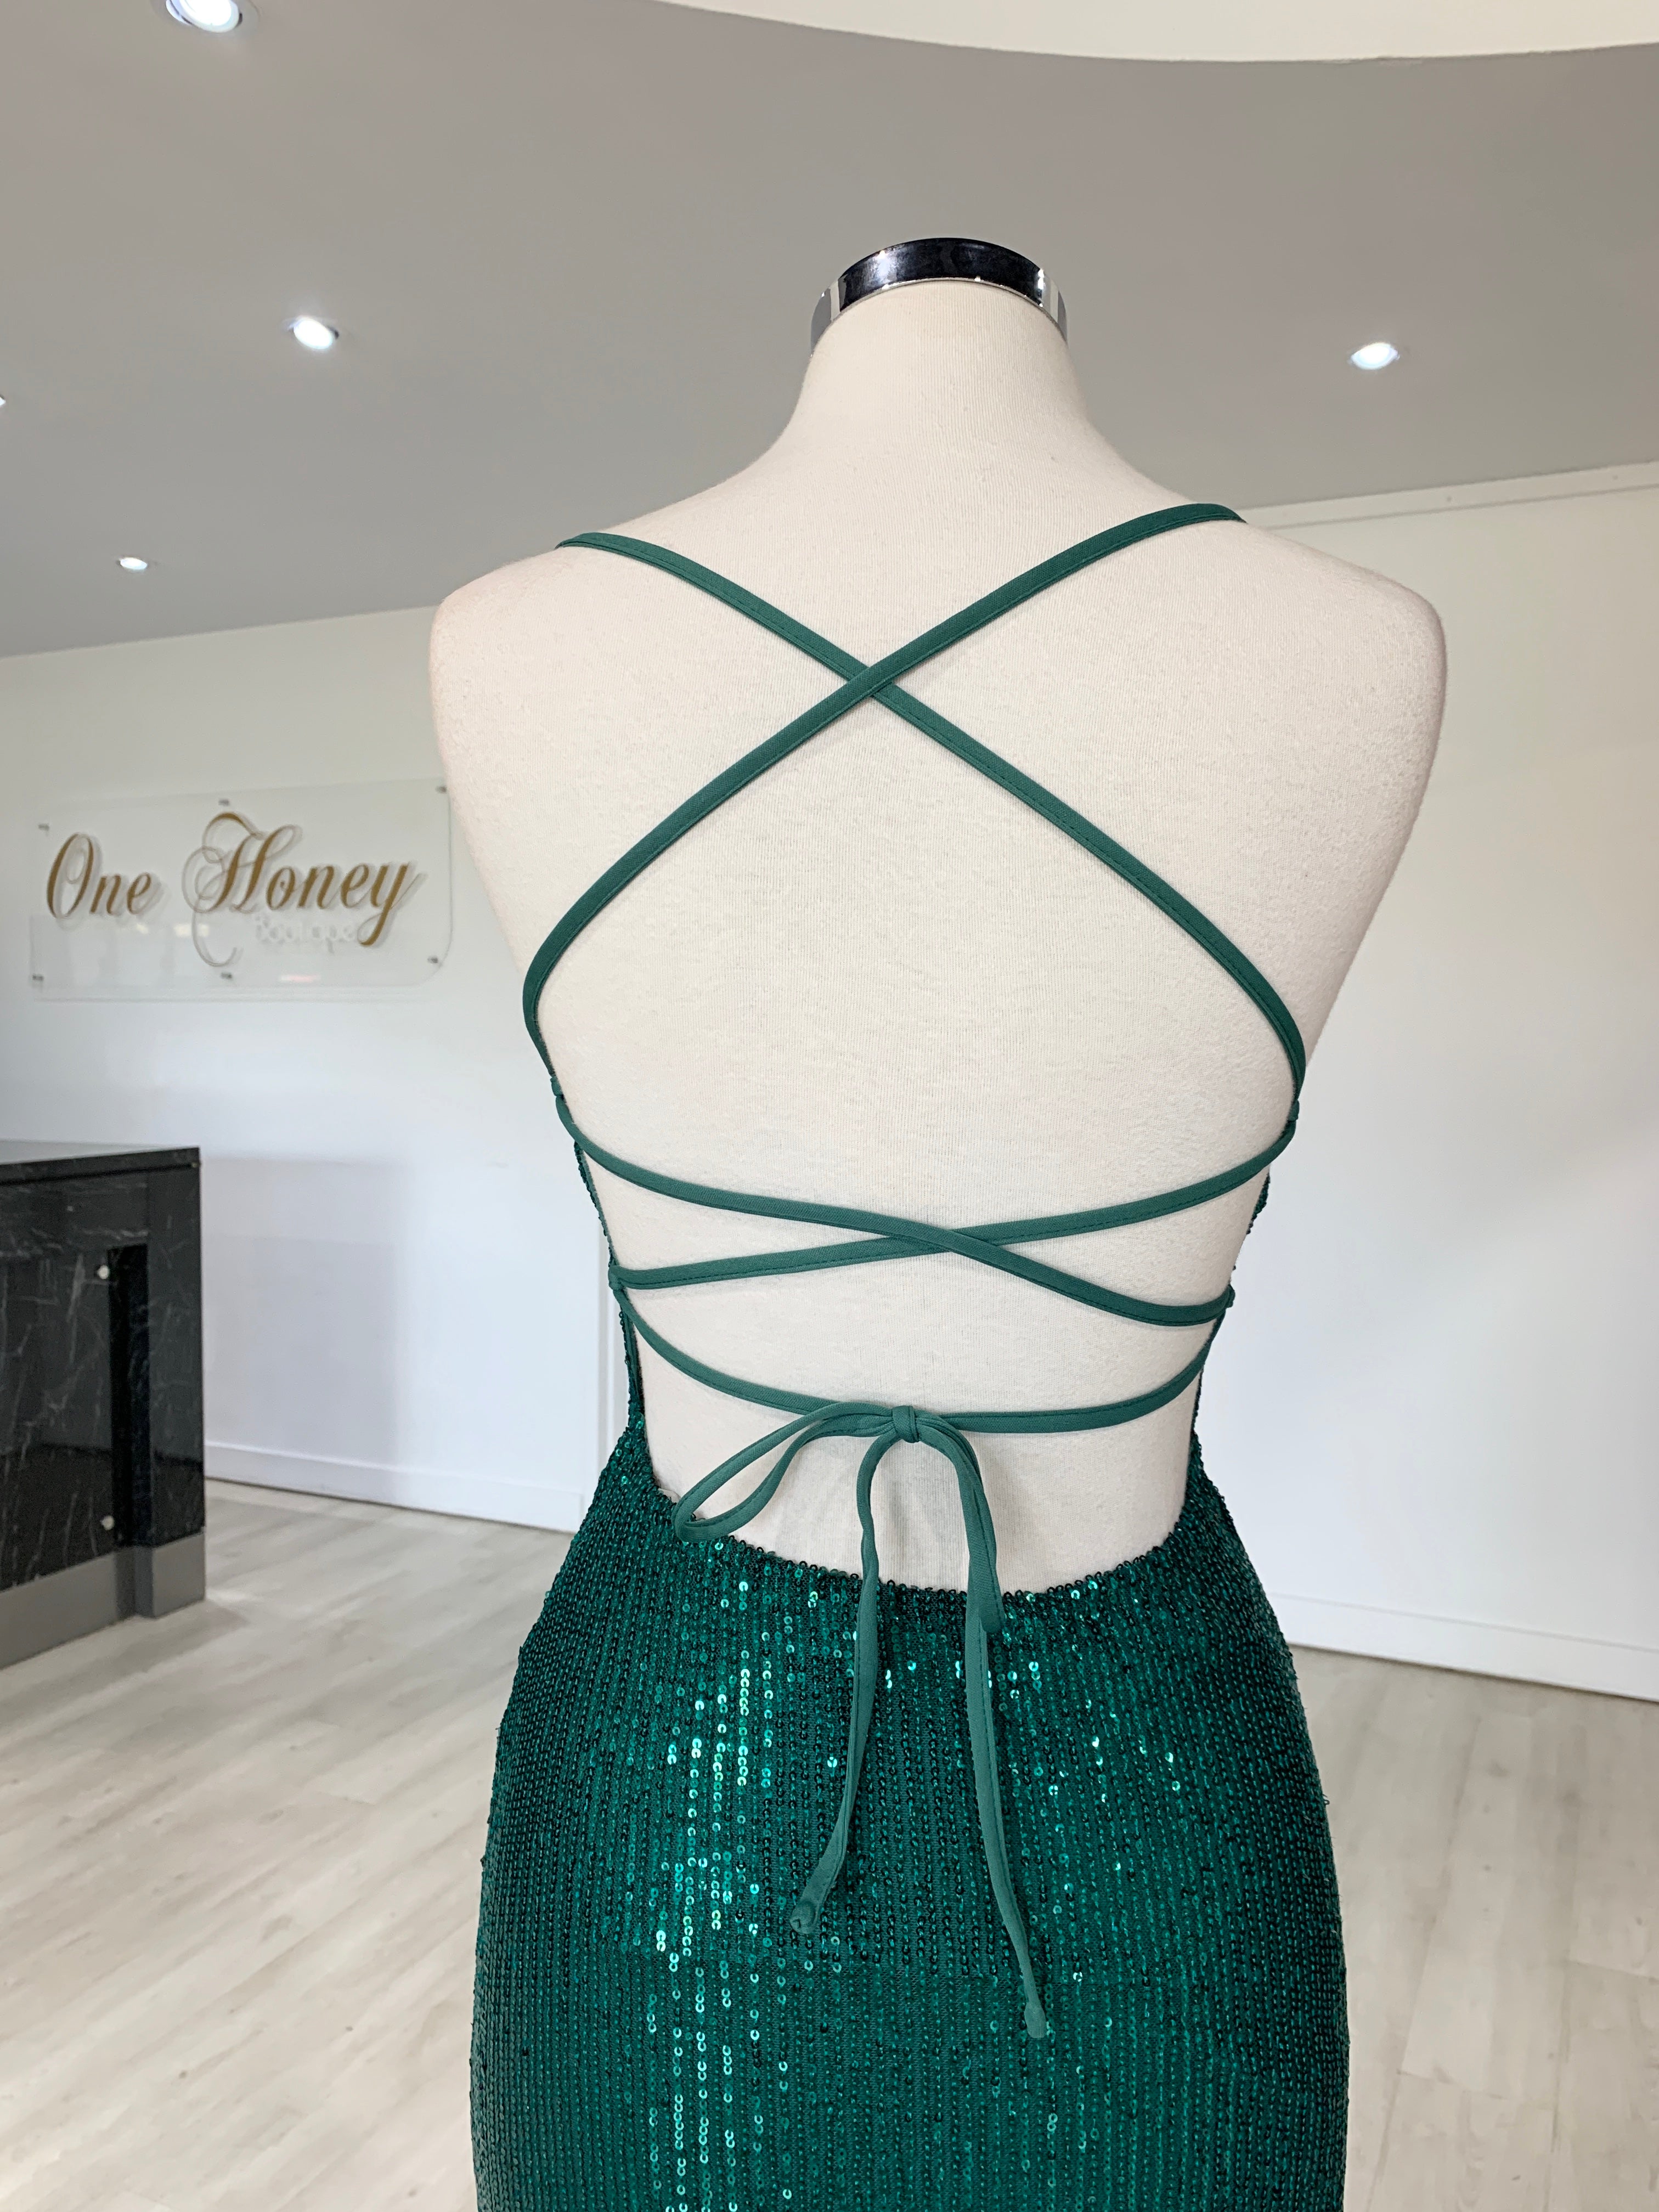 Honey Couture LUZ Emerald Green Lace Up Sequin Formal Gown Dress {vendor} AfterPay Humm ZipPay LayBuy Sezzle